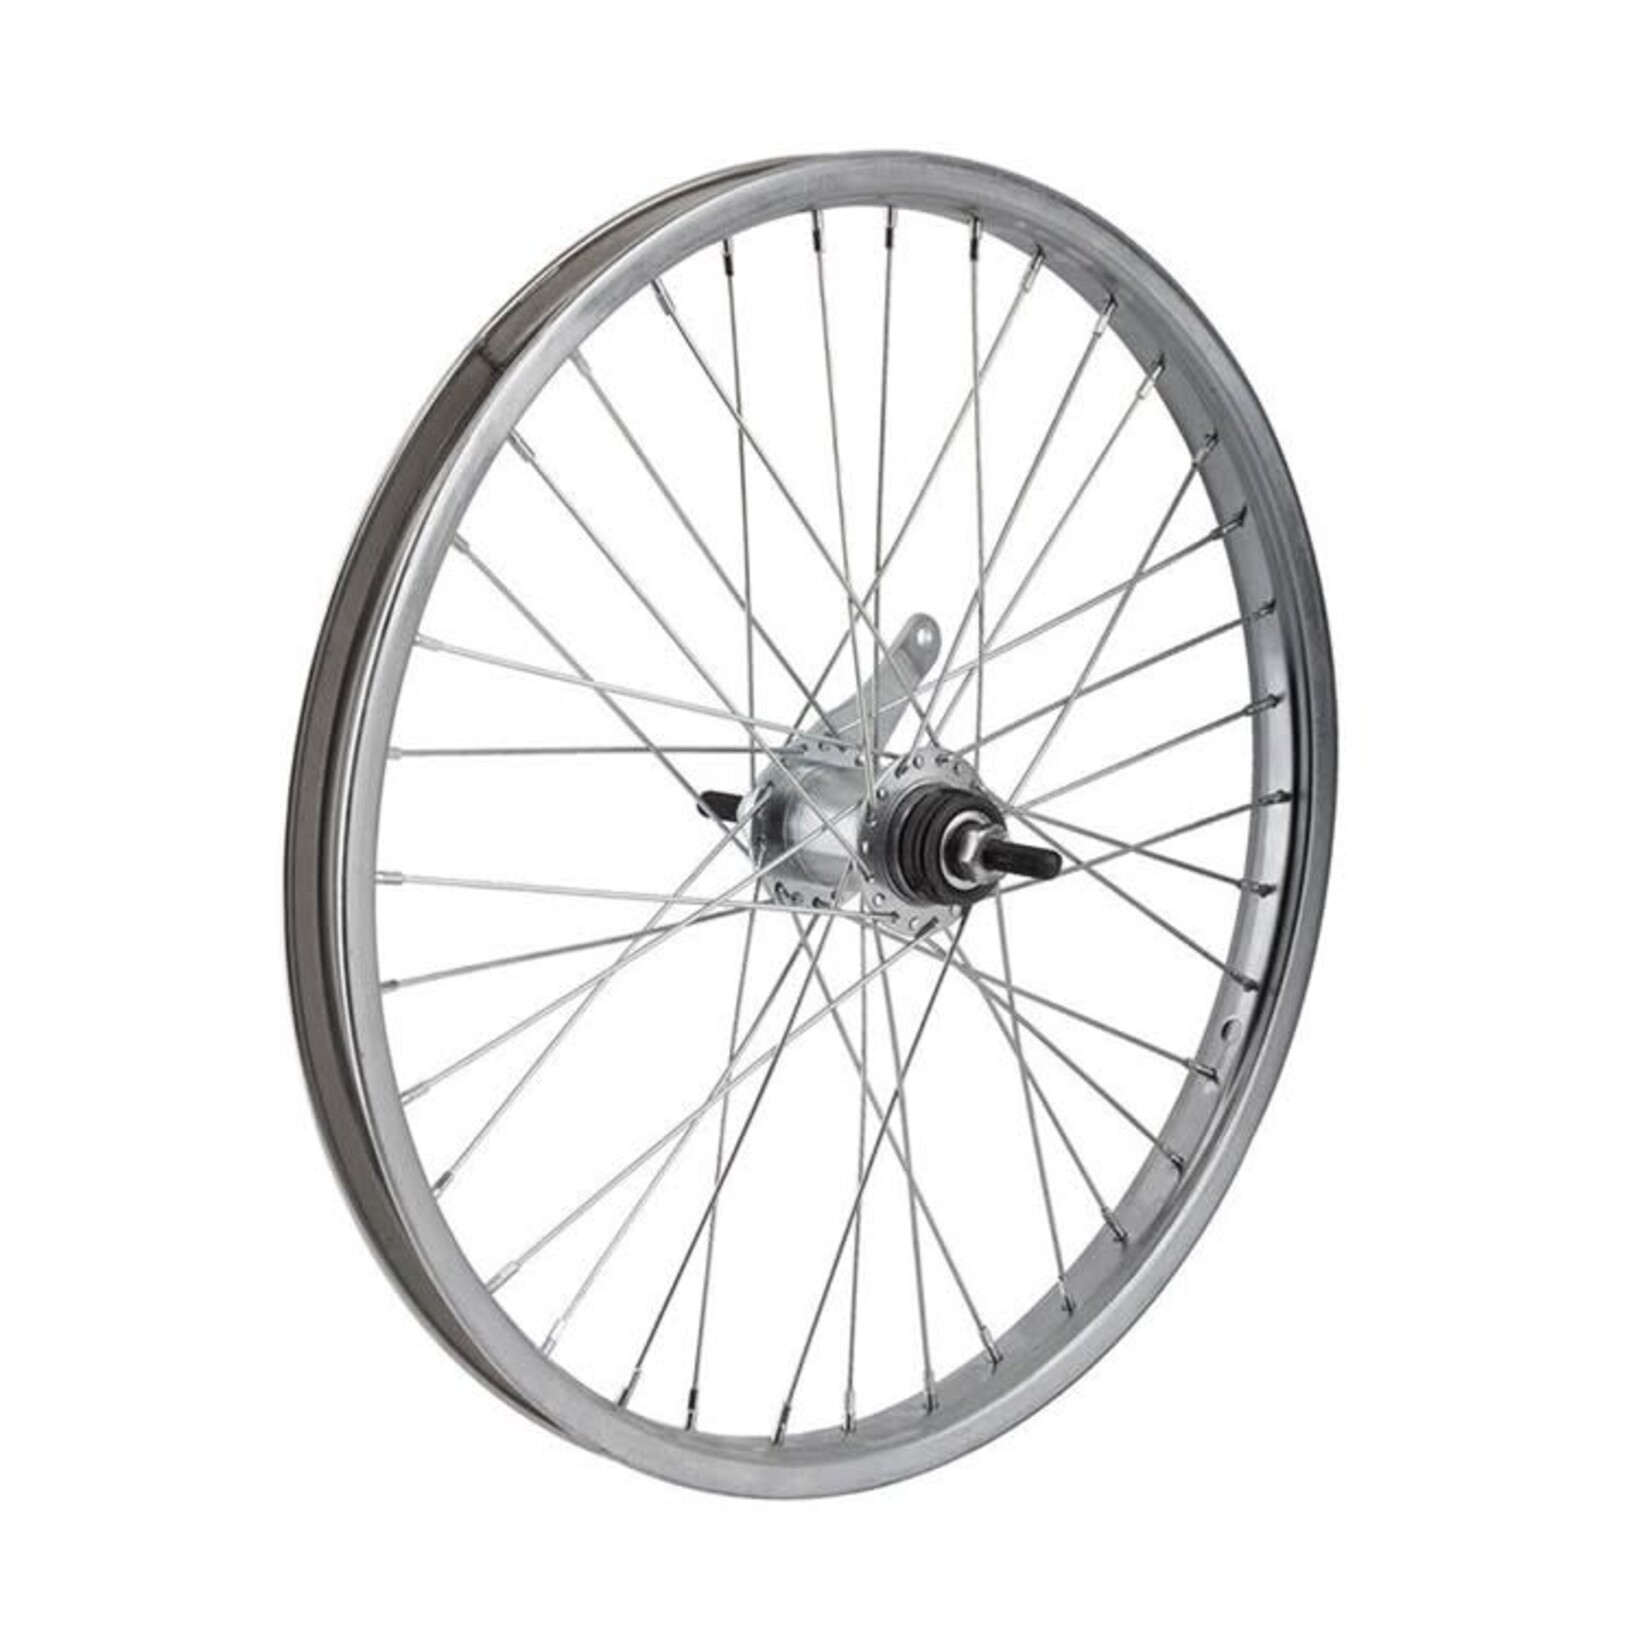 P&A 20" Coaster B/Pedal Brake Nutted Rear Wheel Silver